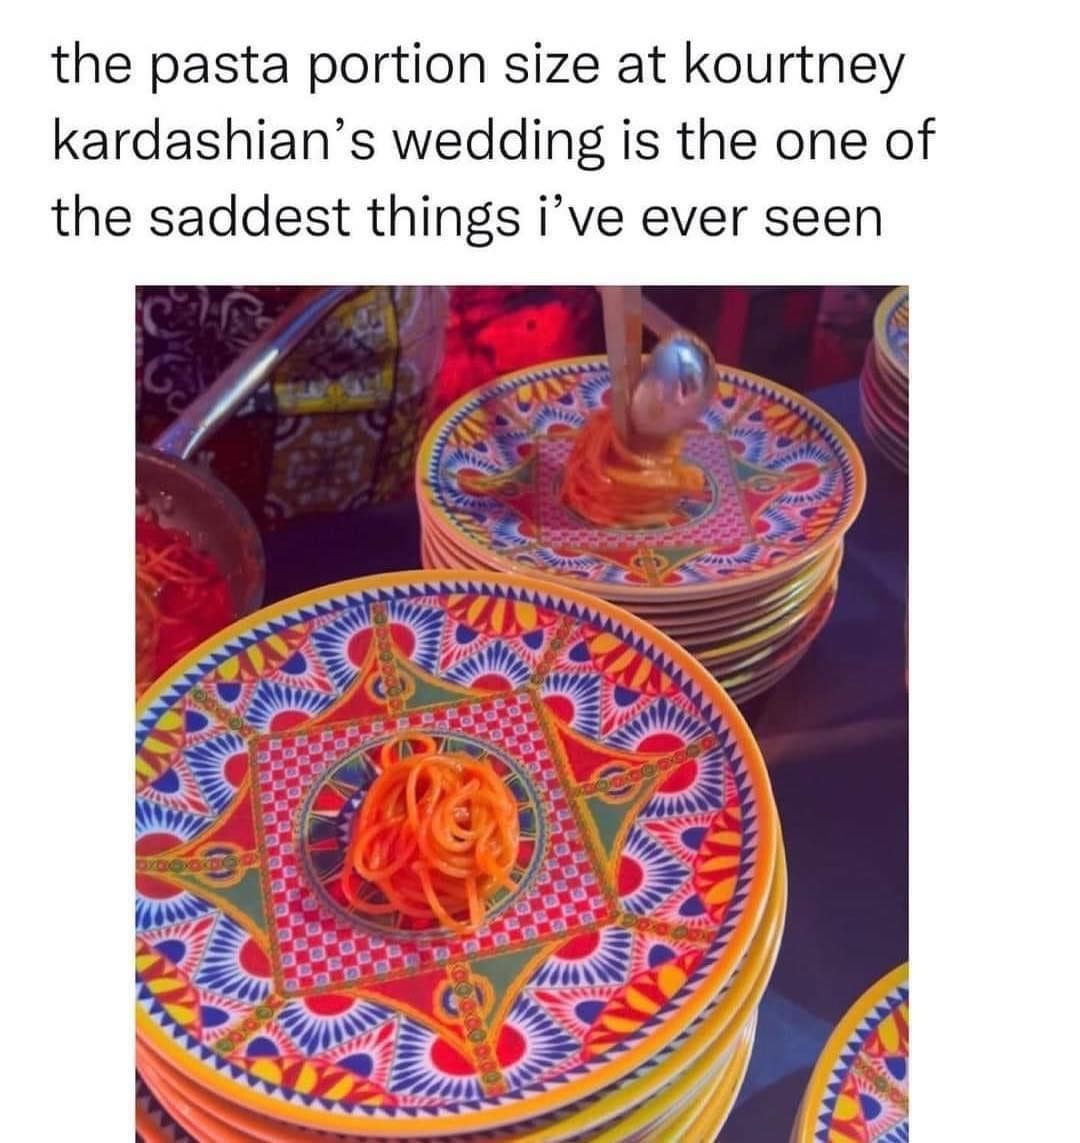 The pasta portion size at Kourtney Kardashian's wedding is the one of the saddest things I've ever seen.